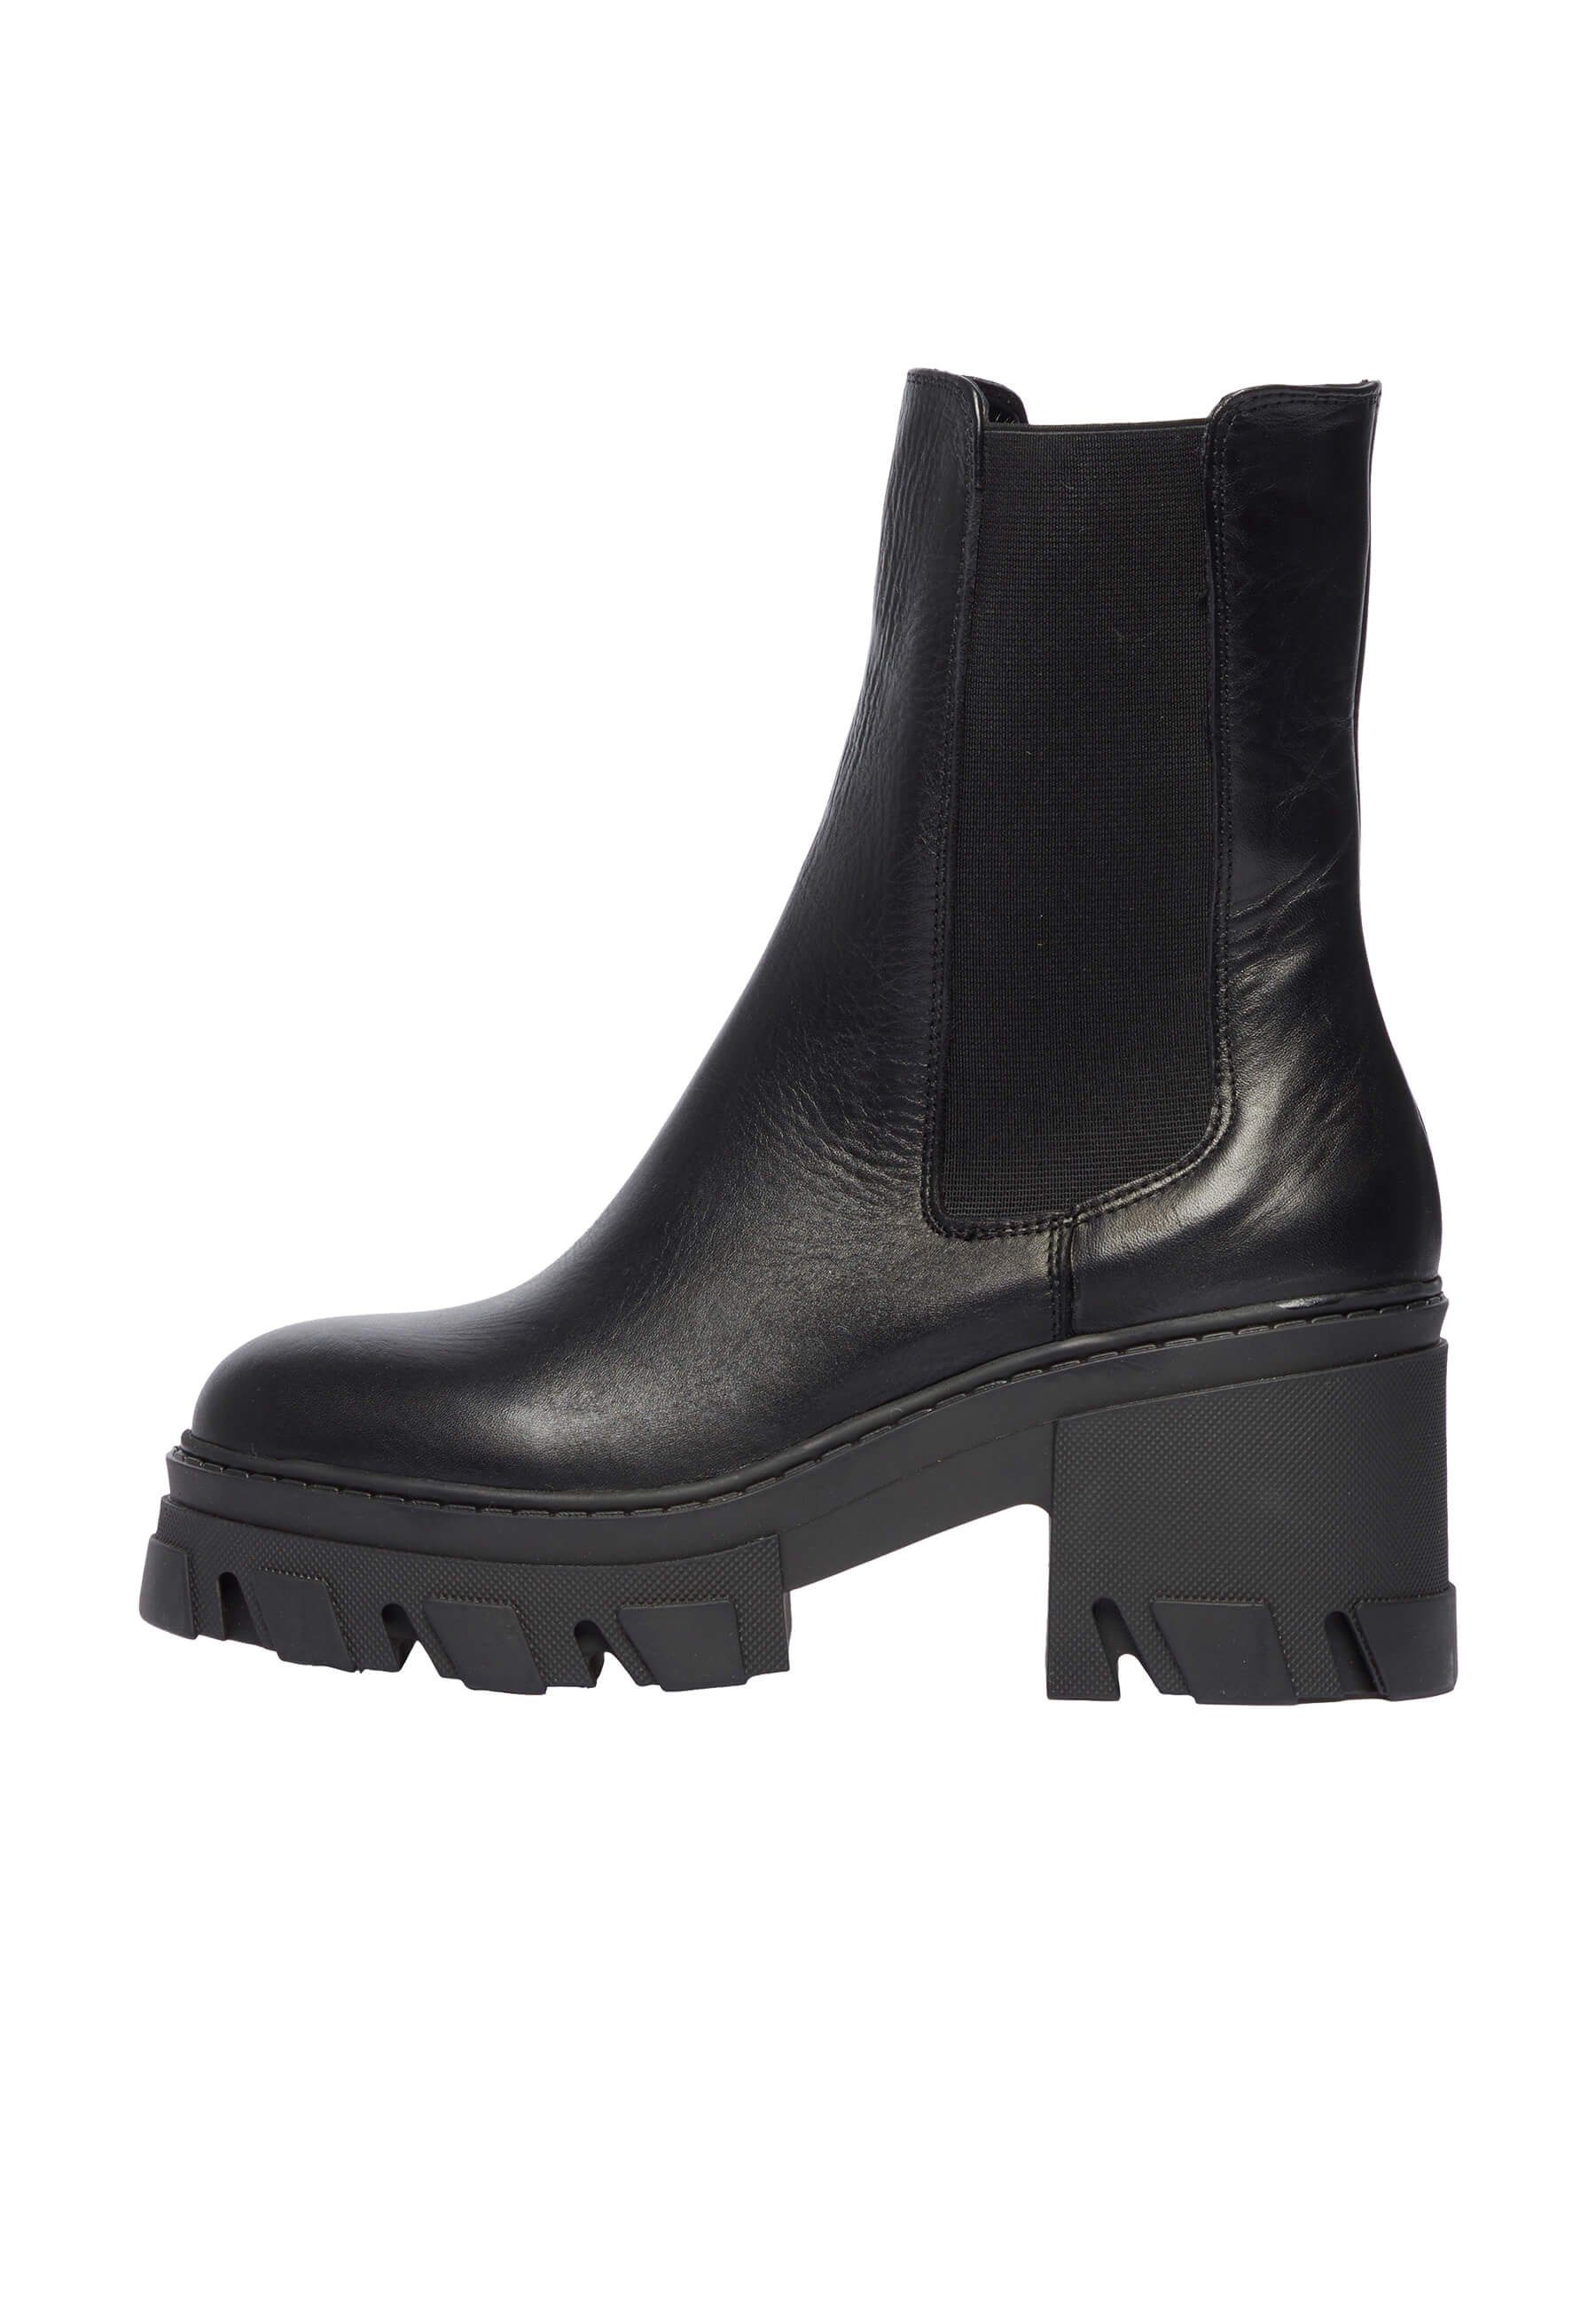 modernem Plateausohle mit Di' Chelseaboots Chelsea nuovo Design Boots Grober Mit